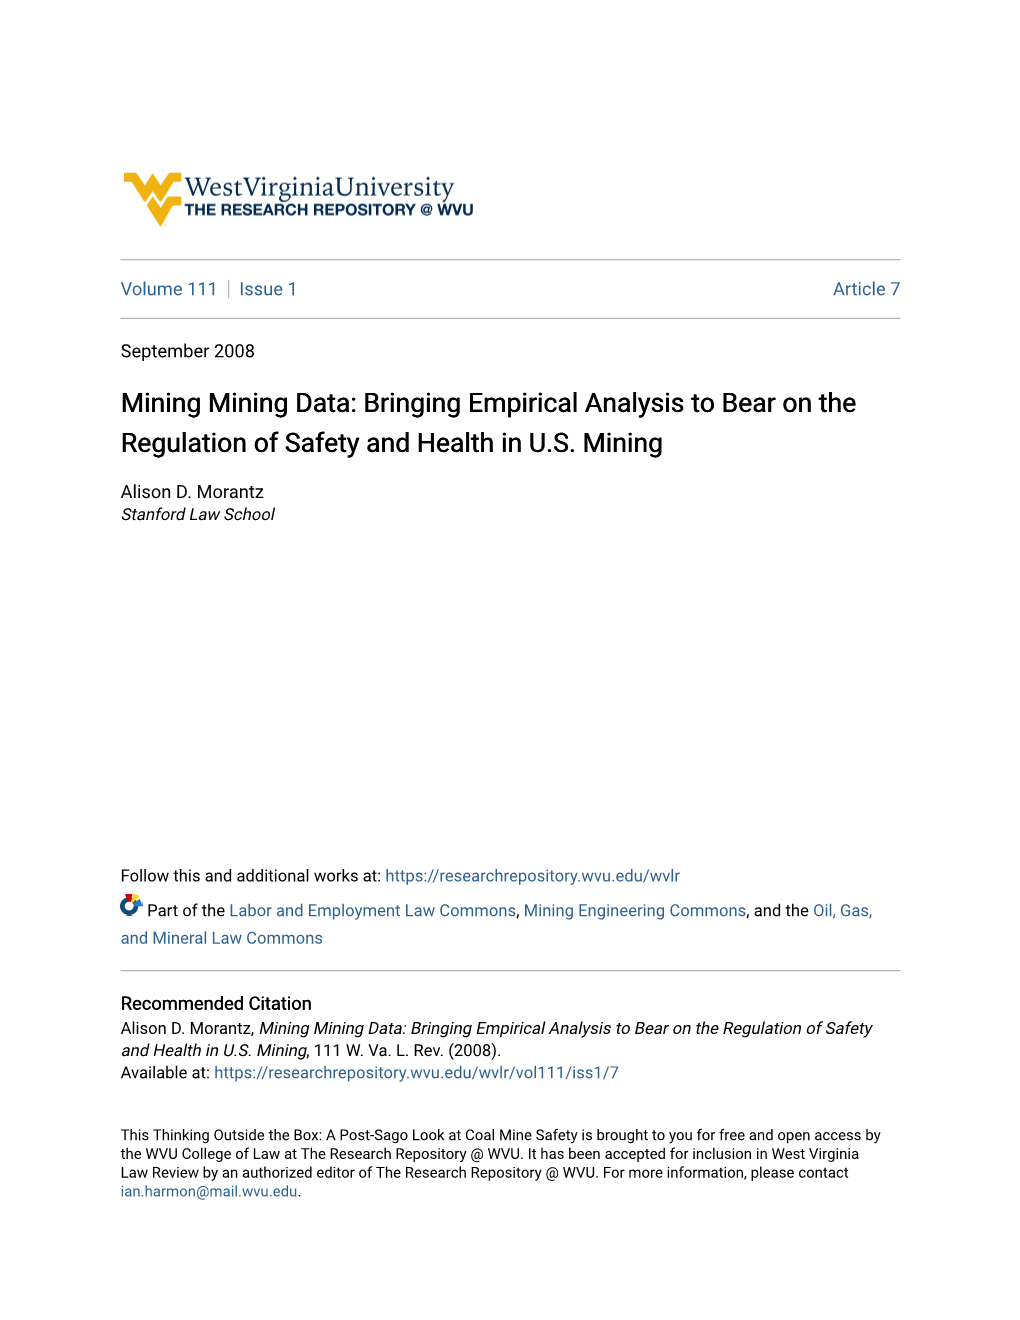 Mining Mining Data: Bringing Empirical Analysis to Bear on the Regulation of Safety and Health in U.S